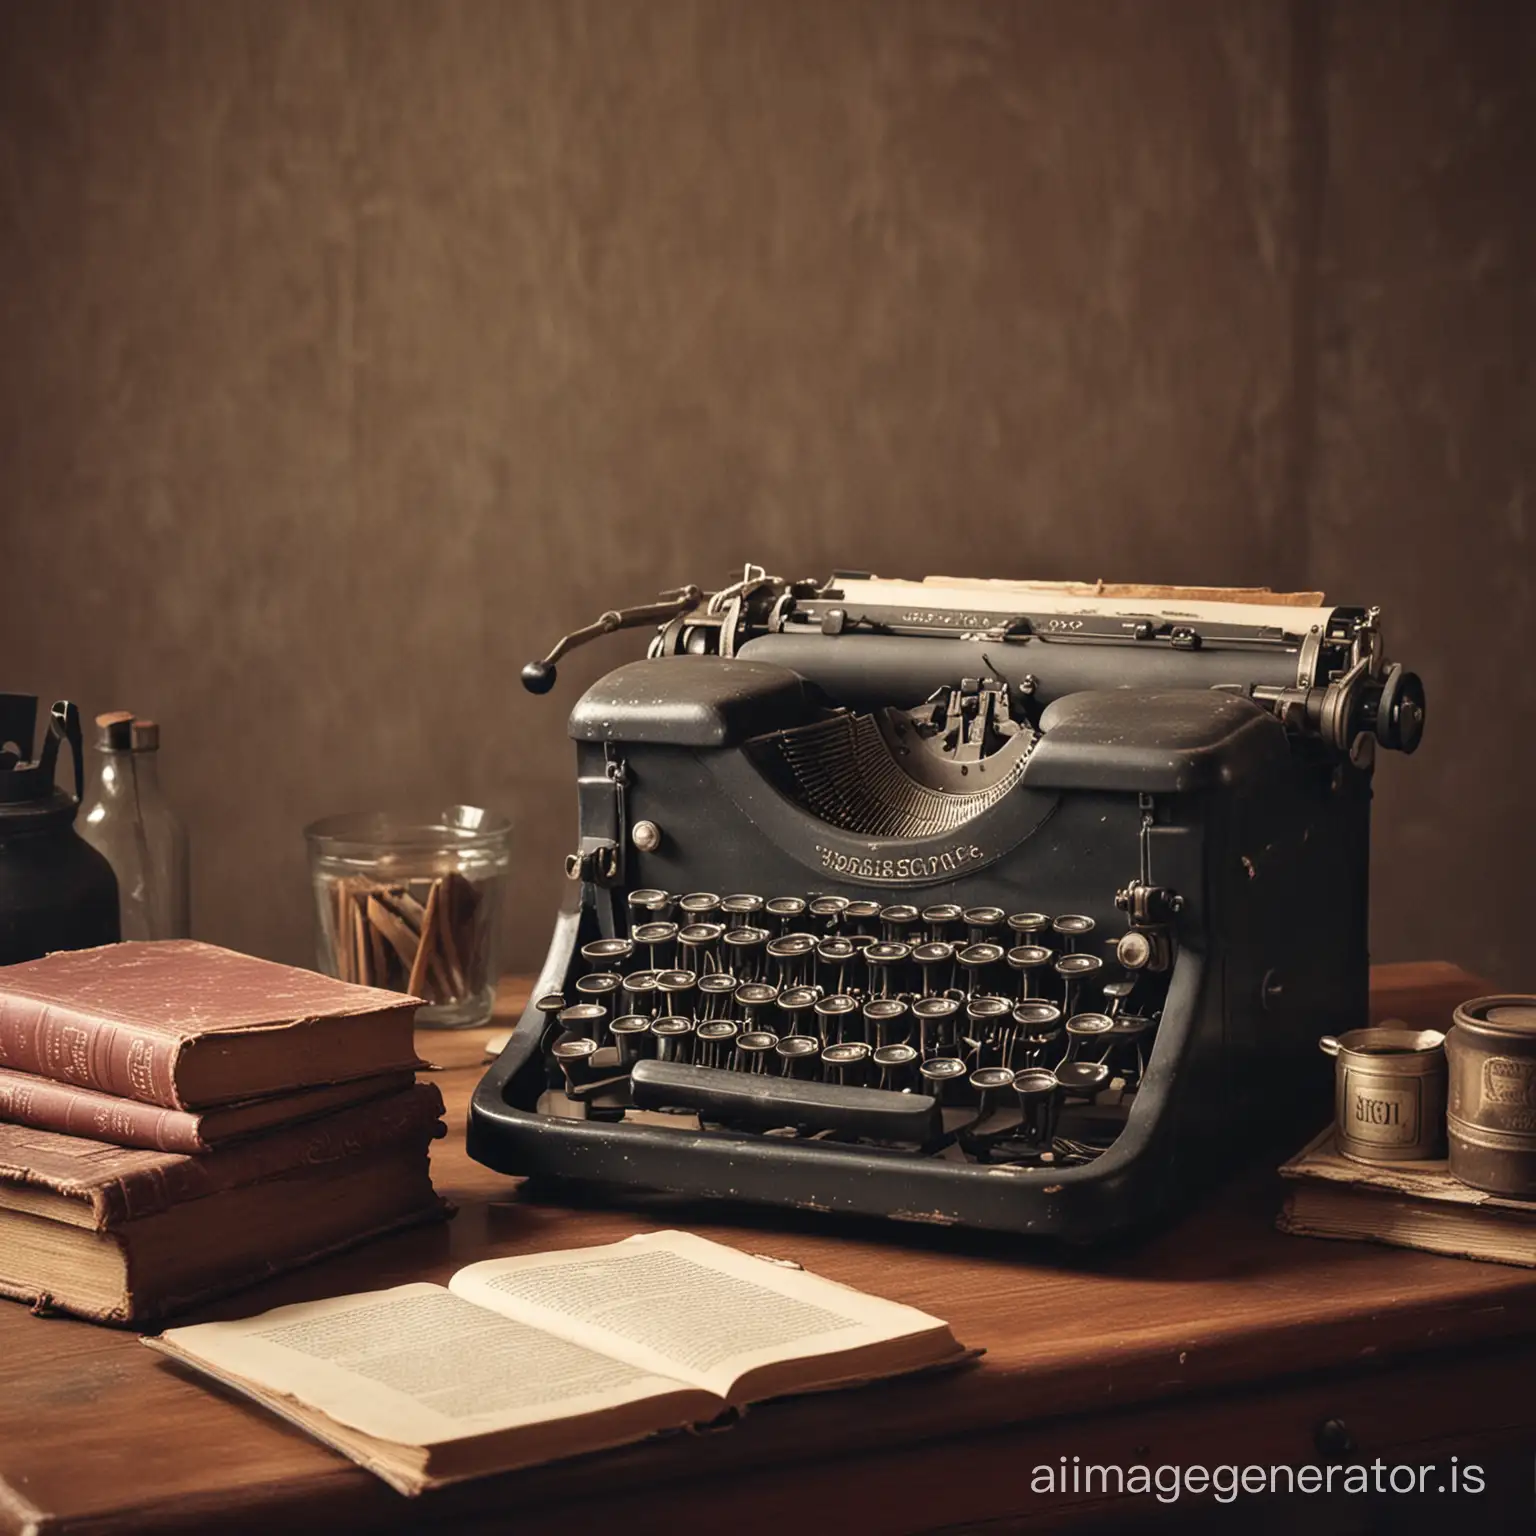 writer's workshop, old books, typewriter, atmosphere of the 19th century